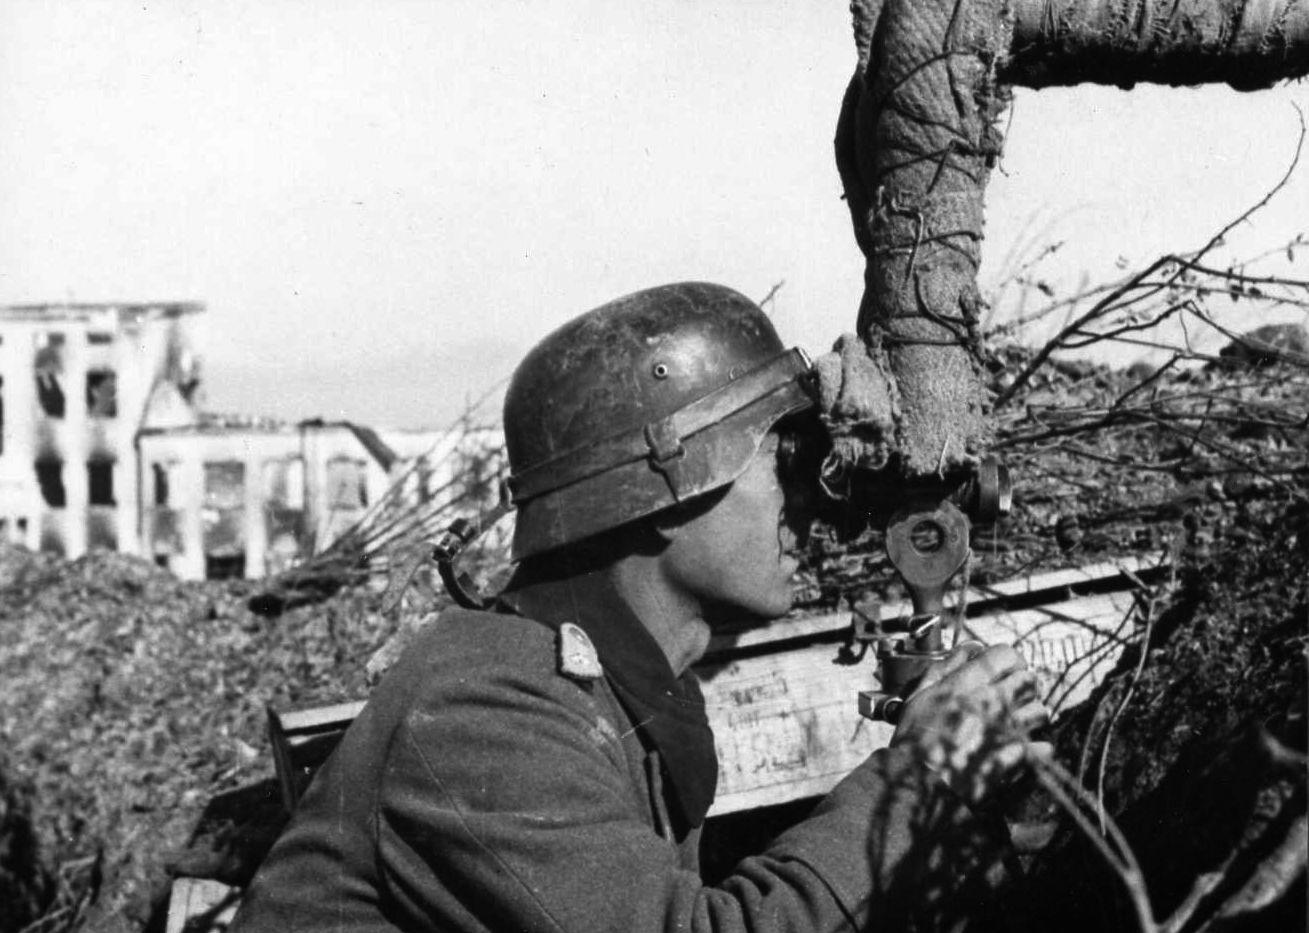 During the catastrophic German defeat at Stalingrad, a Wehrmacht soldier peers from cover through a telescopic viewer. The distant Soviet Red Army tightened the ring of steel around the Germans at Stalingrad until they capitulated in February 1943. 